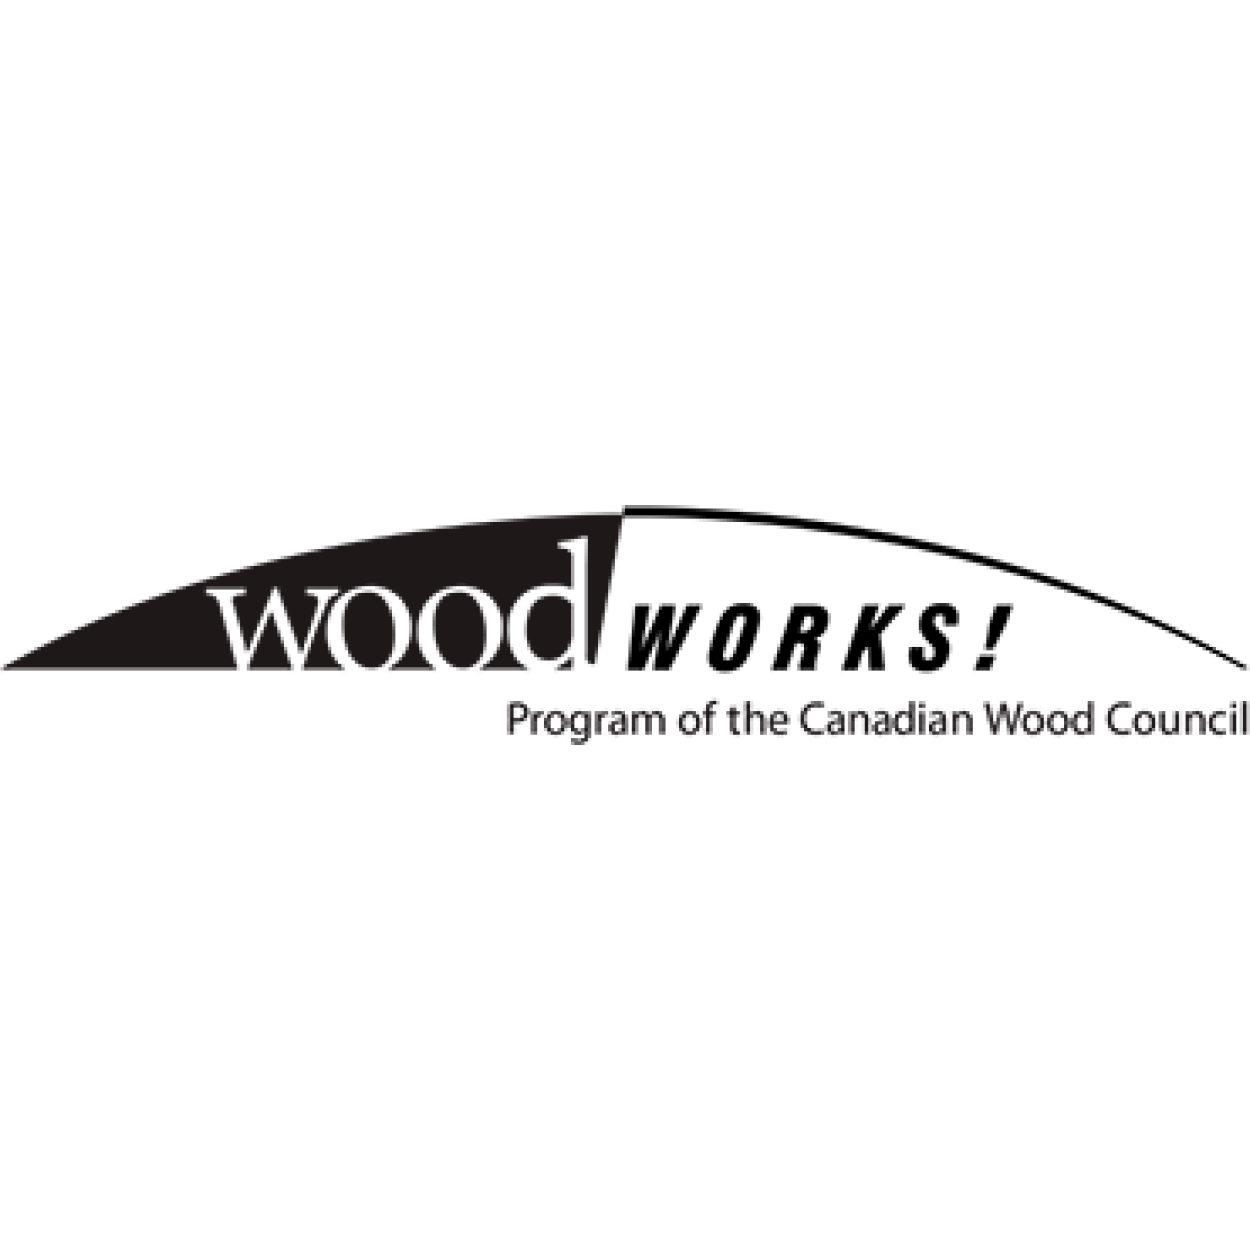 WoodWORKS! logo, a program of the Canadian Wood Council